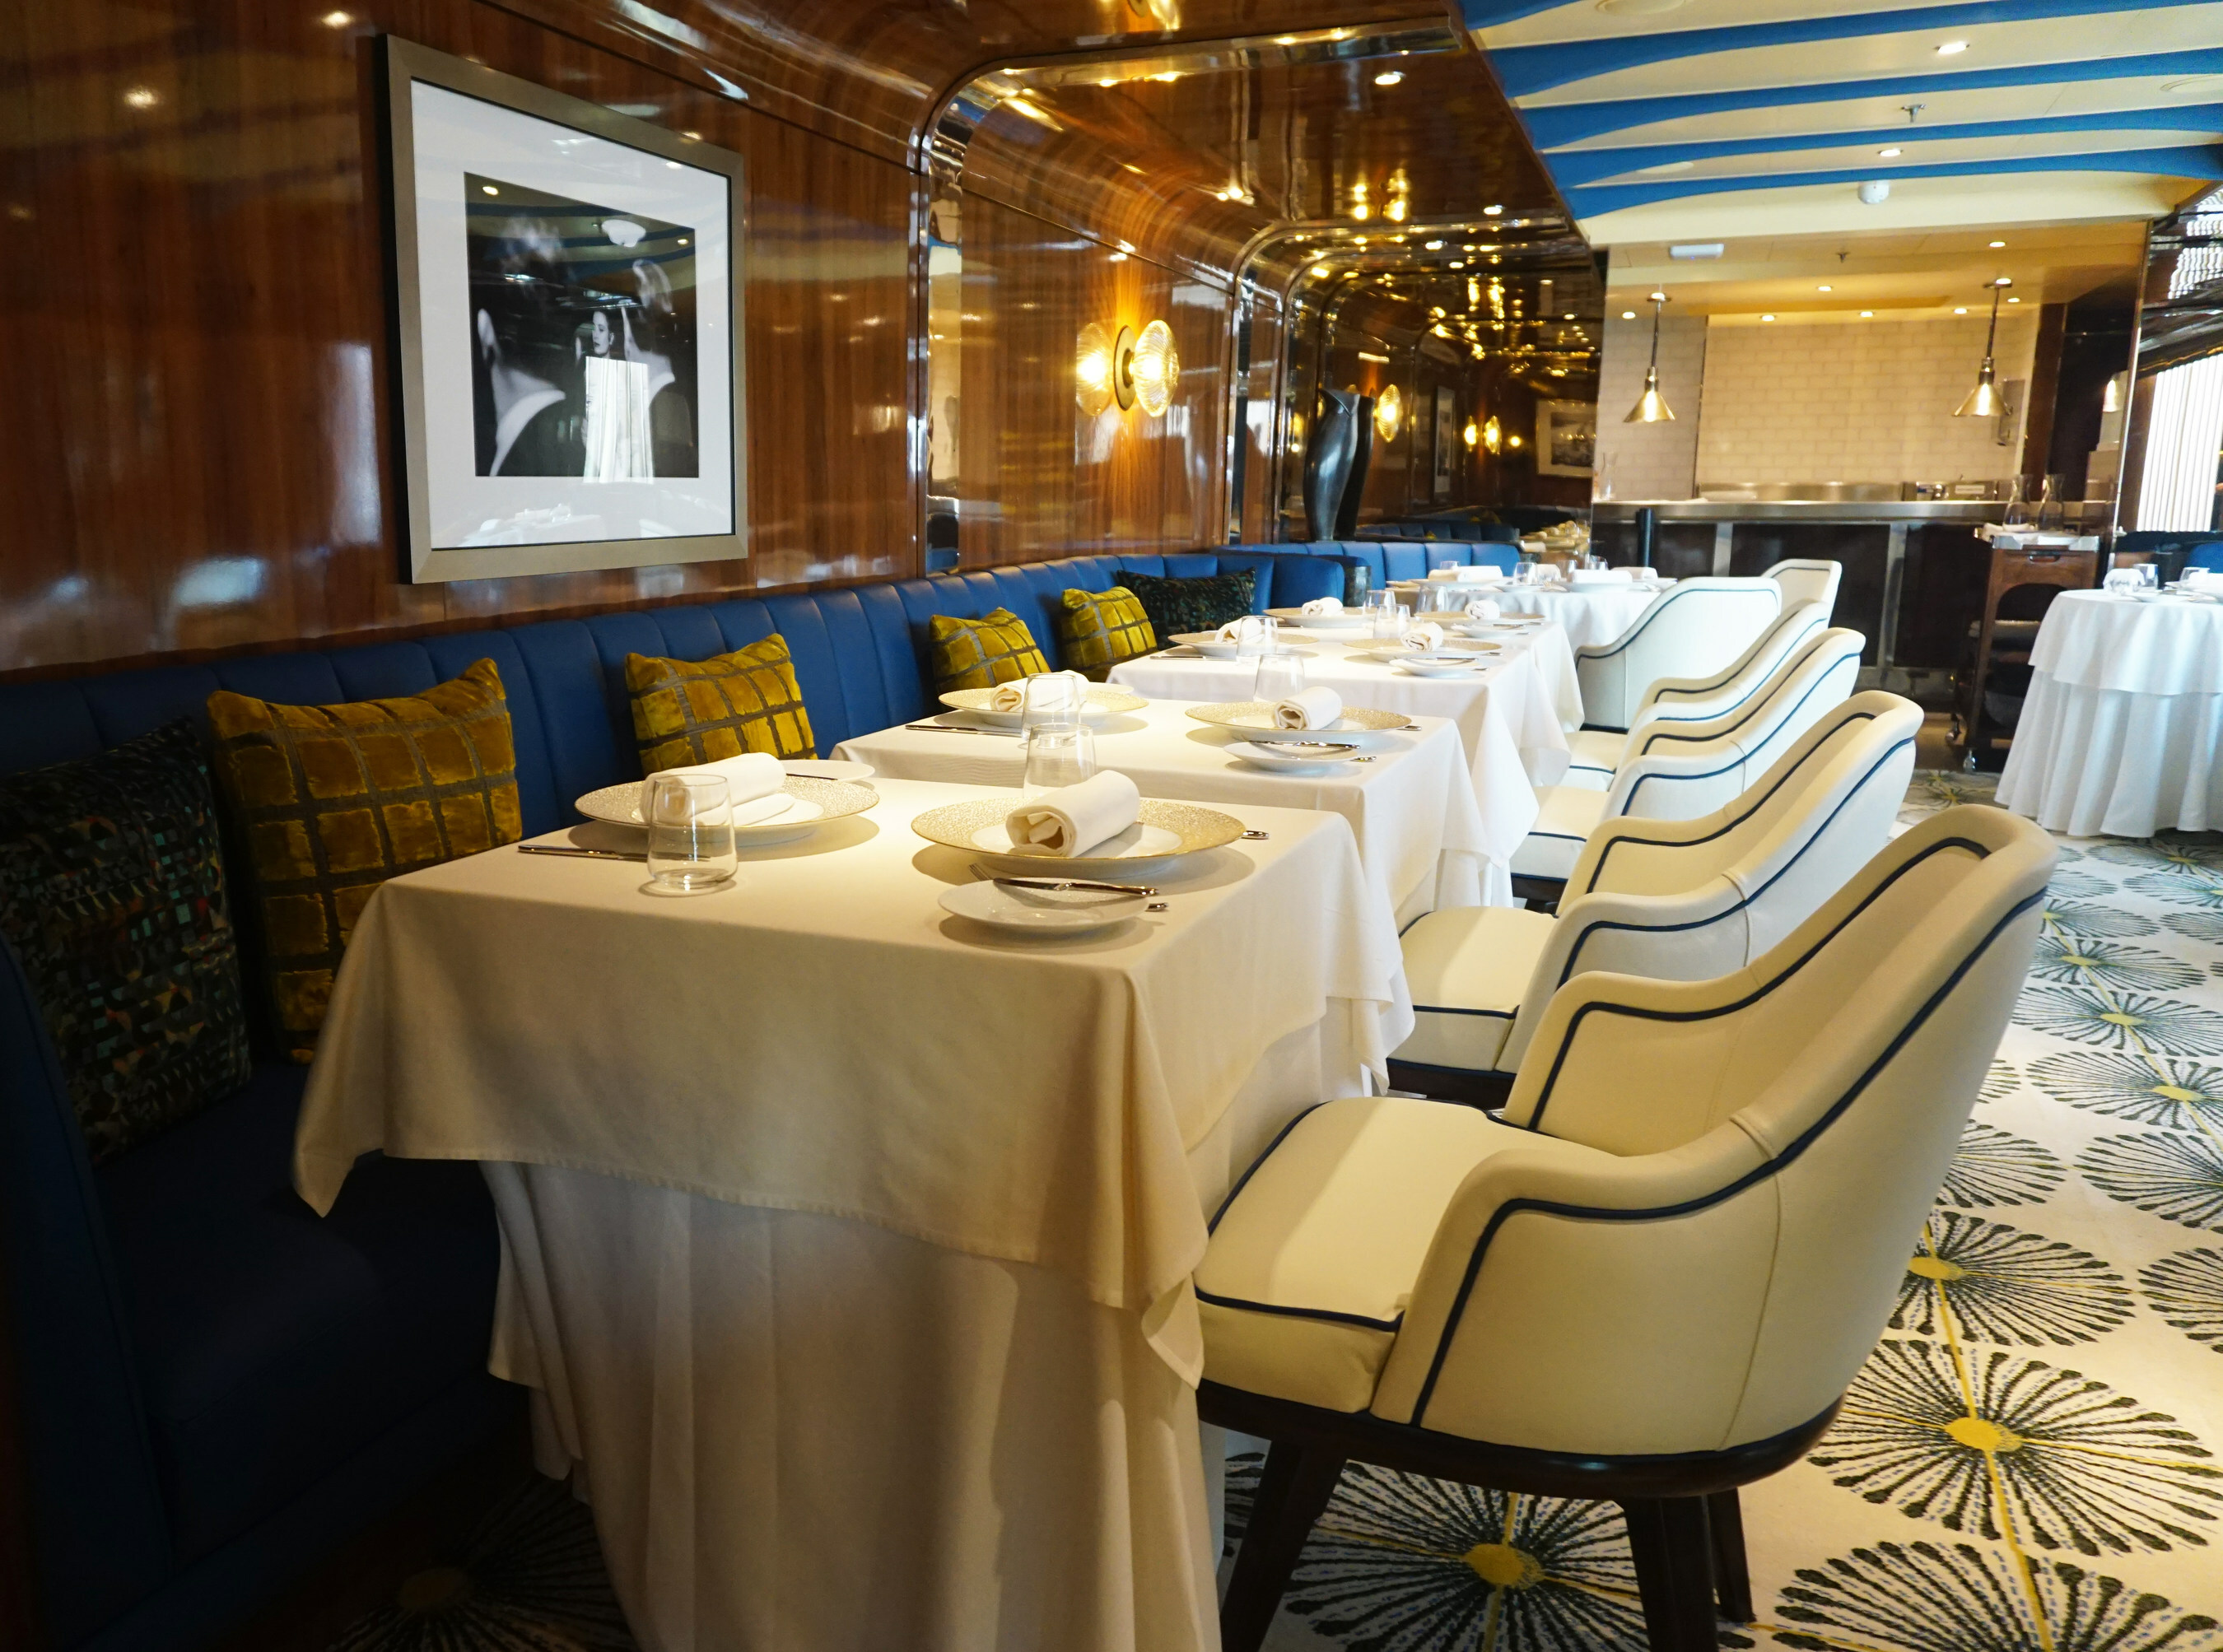 Solis is Seabourn’s new fine dining restaurant celebrating Mediterranean cuisine inspired by the places visited by the line’s ultra-luxury ships. Seabourn opened the first Solis on Seabourn Quest on January 20, 2024 (Image at LateCruiseNews.com - February 2024)